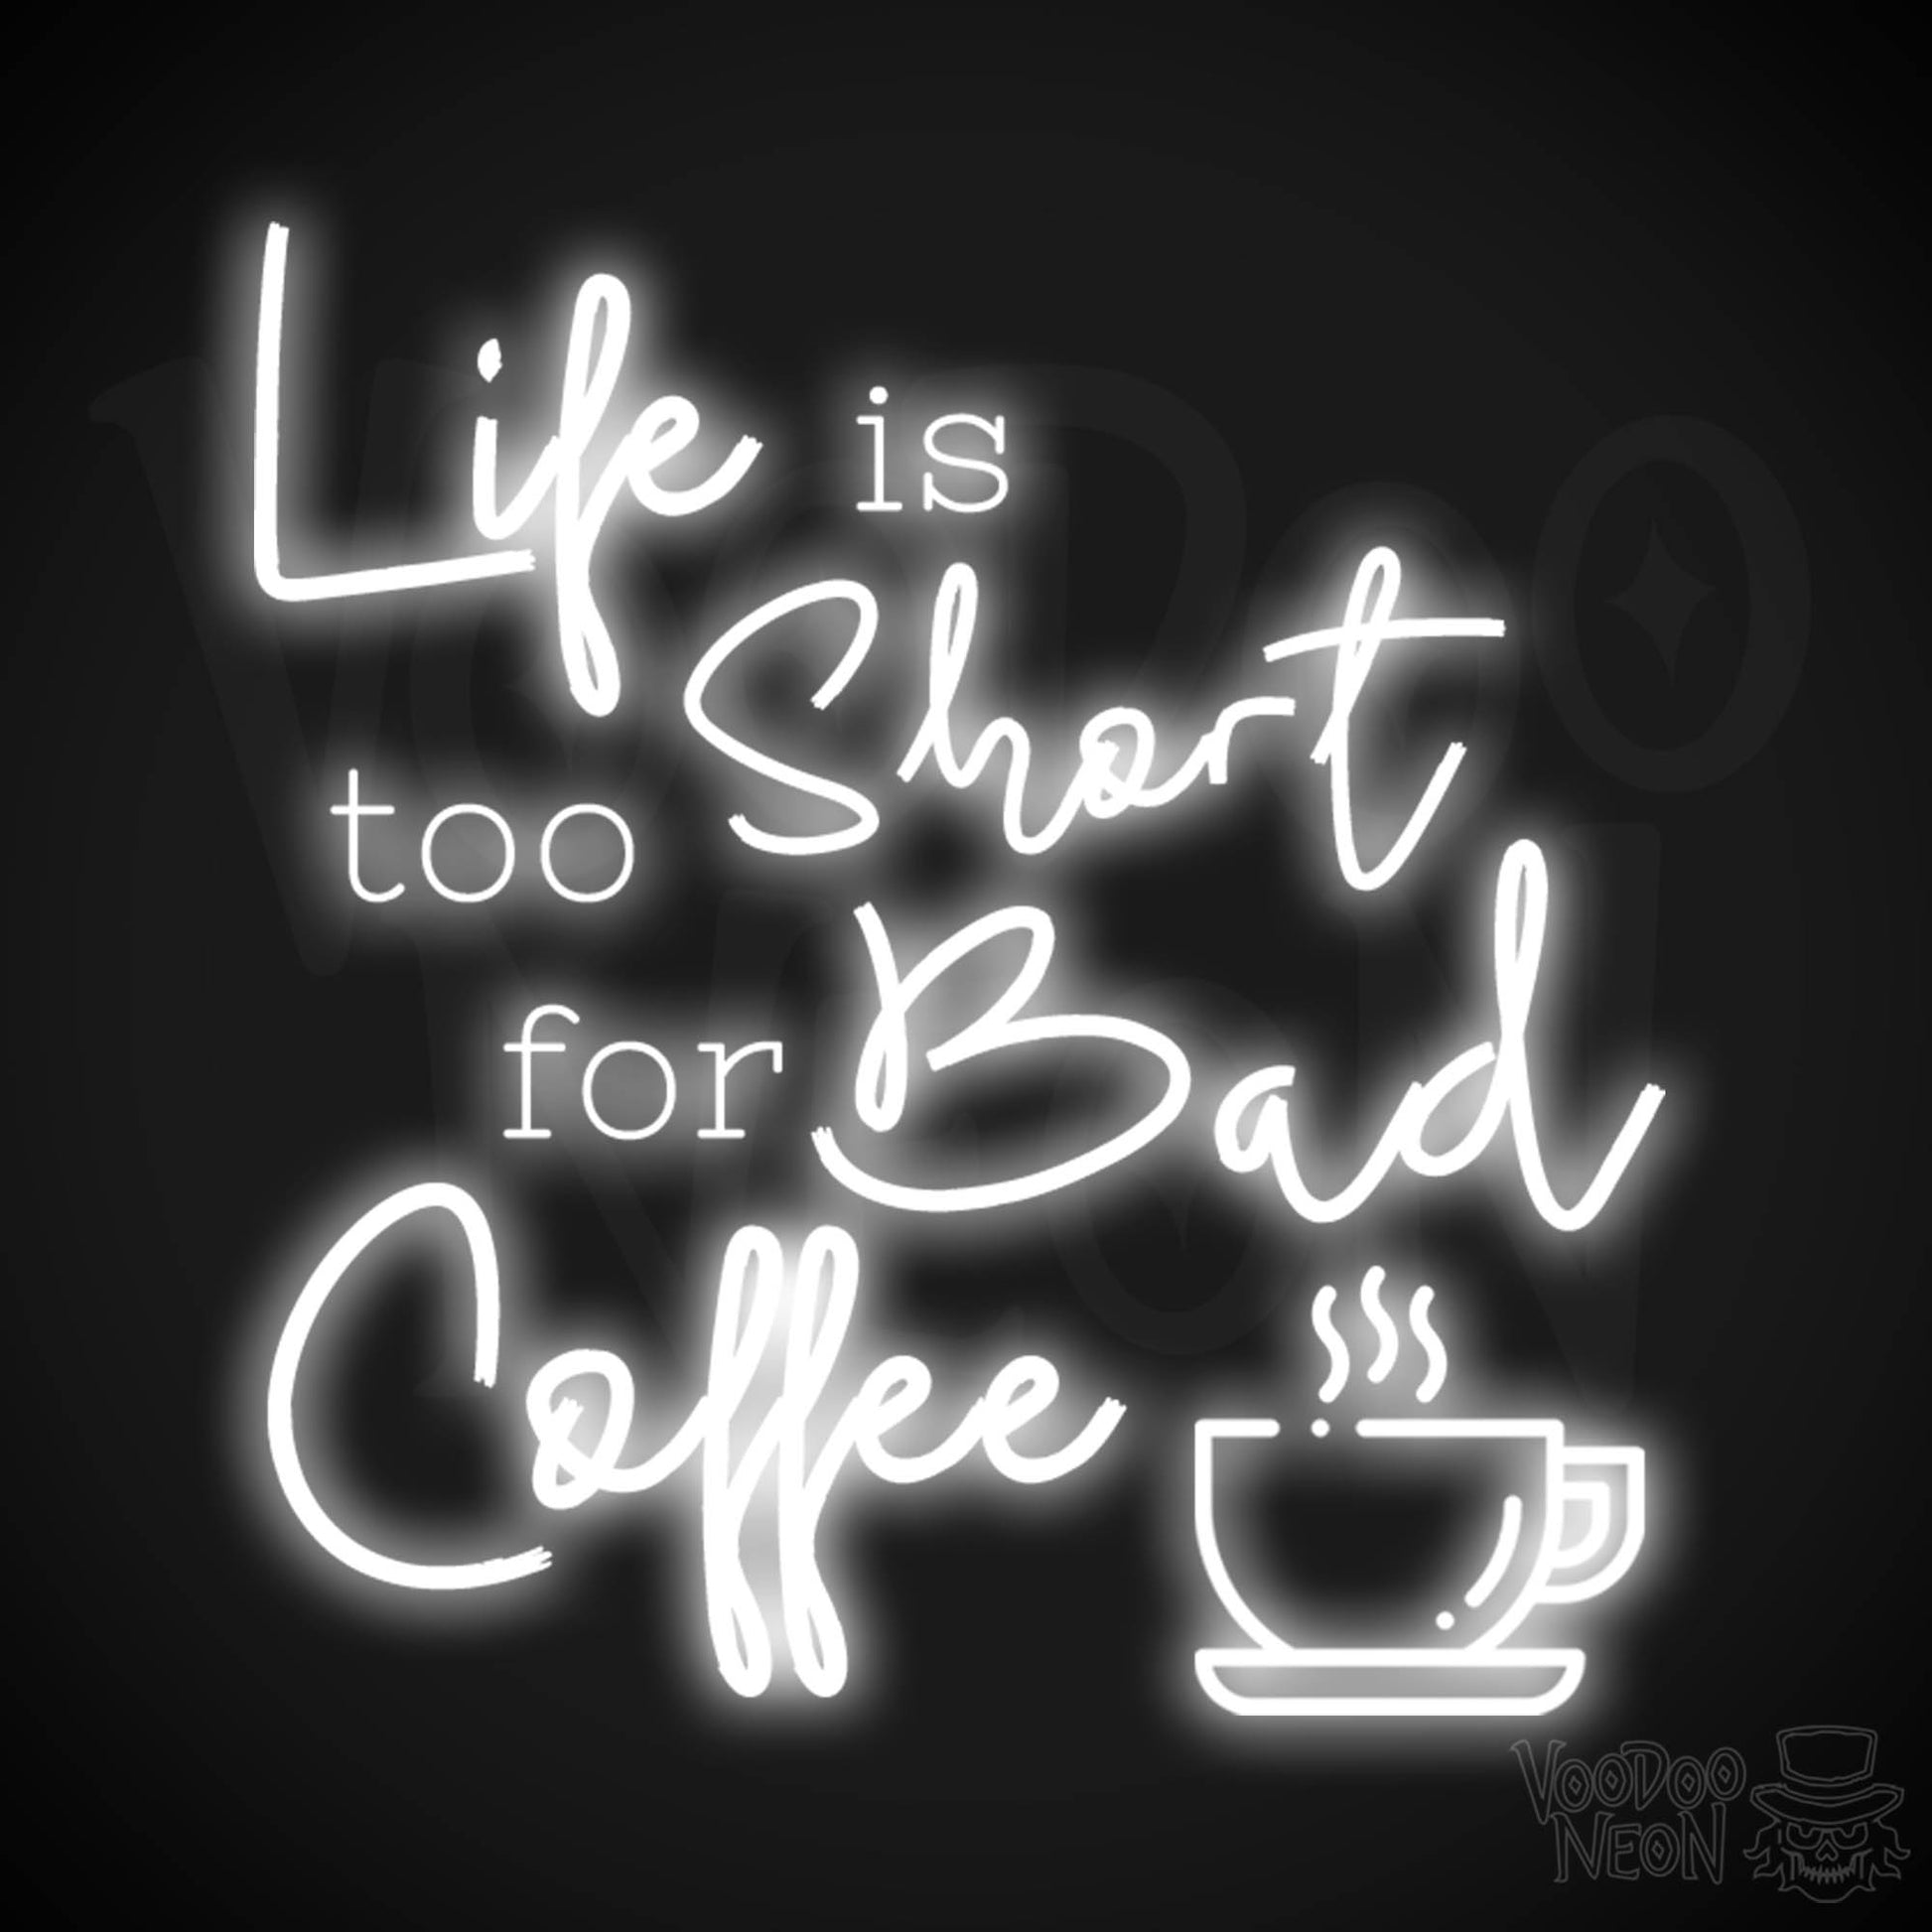 Life Is Too Short For Bad Coffee Neon Sign - Neon Life Is Too Short For Bad Coffee Sign - LED Neon Wall Art - Color White